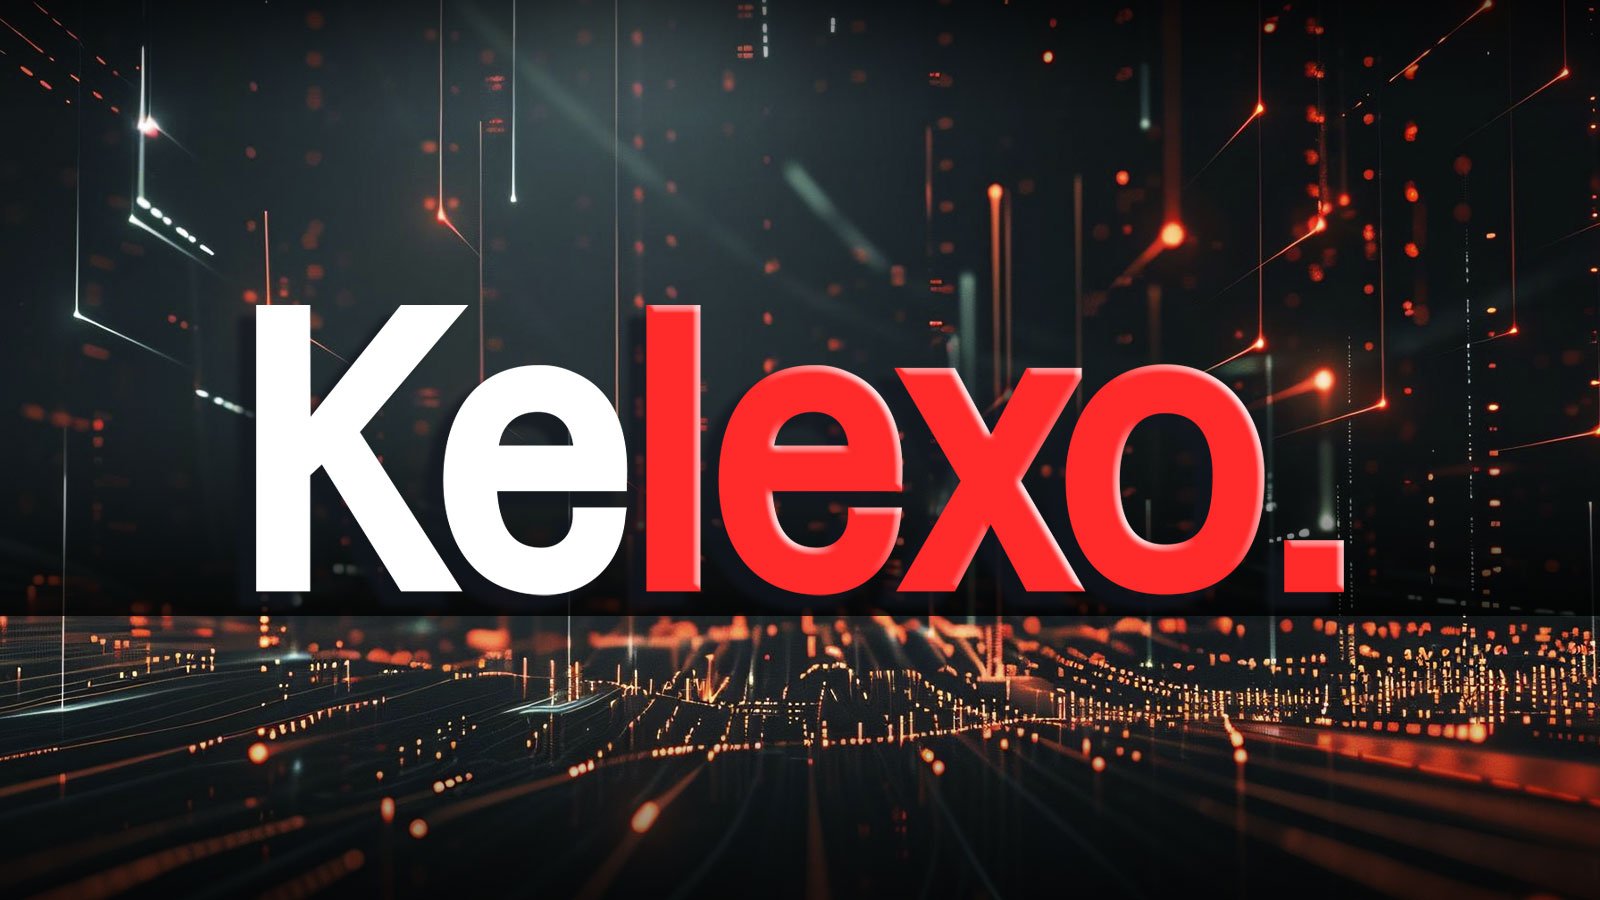 Kelexo (KLXO) Offers Speed and Low Fees, Bitcoin (BTC) Halving Buzz Amplifies, Solana (SOL) Hedge Funds Place $1M Wagers Market Growth